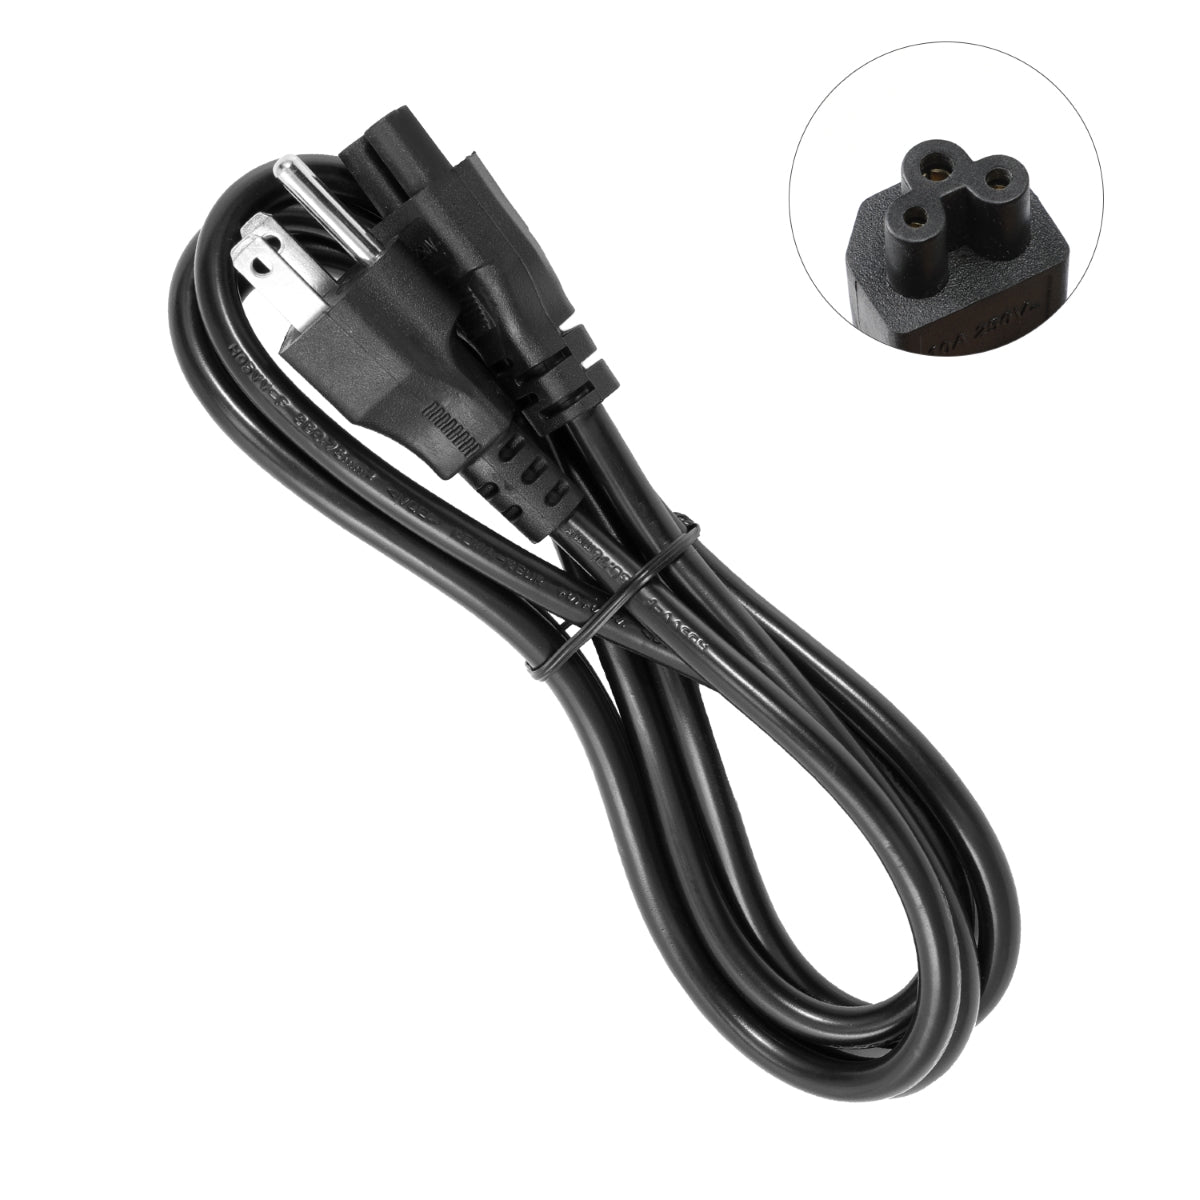 Power Cord for LG 42LN5400 Monitor.